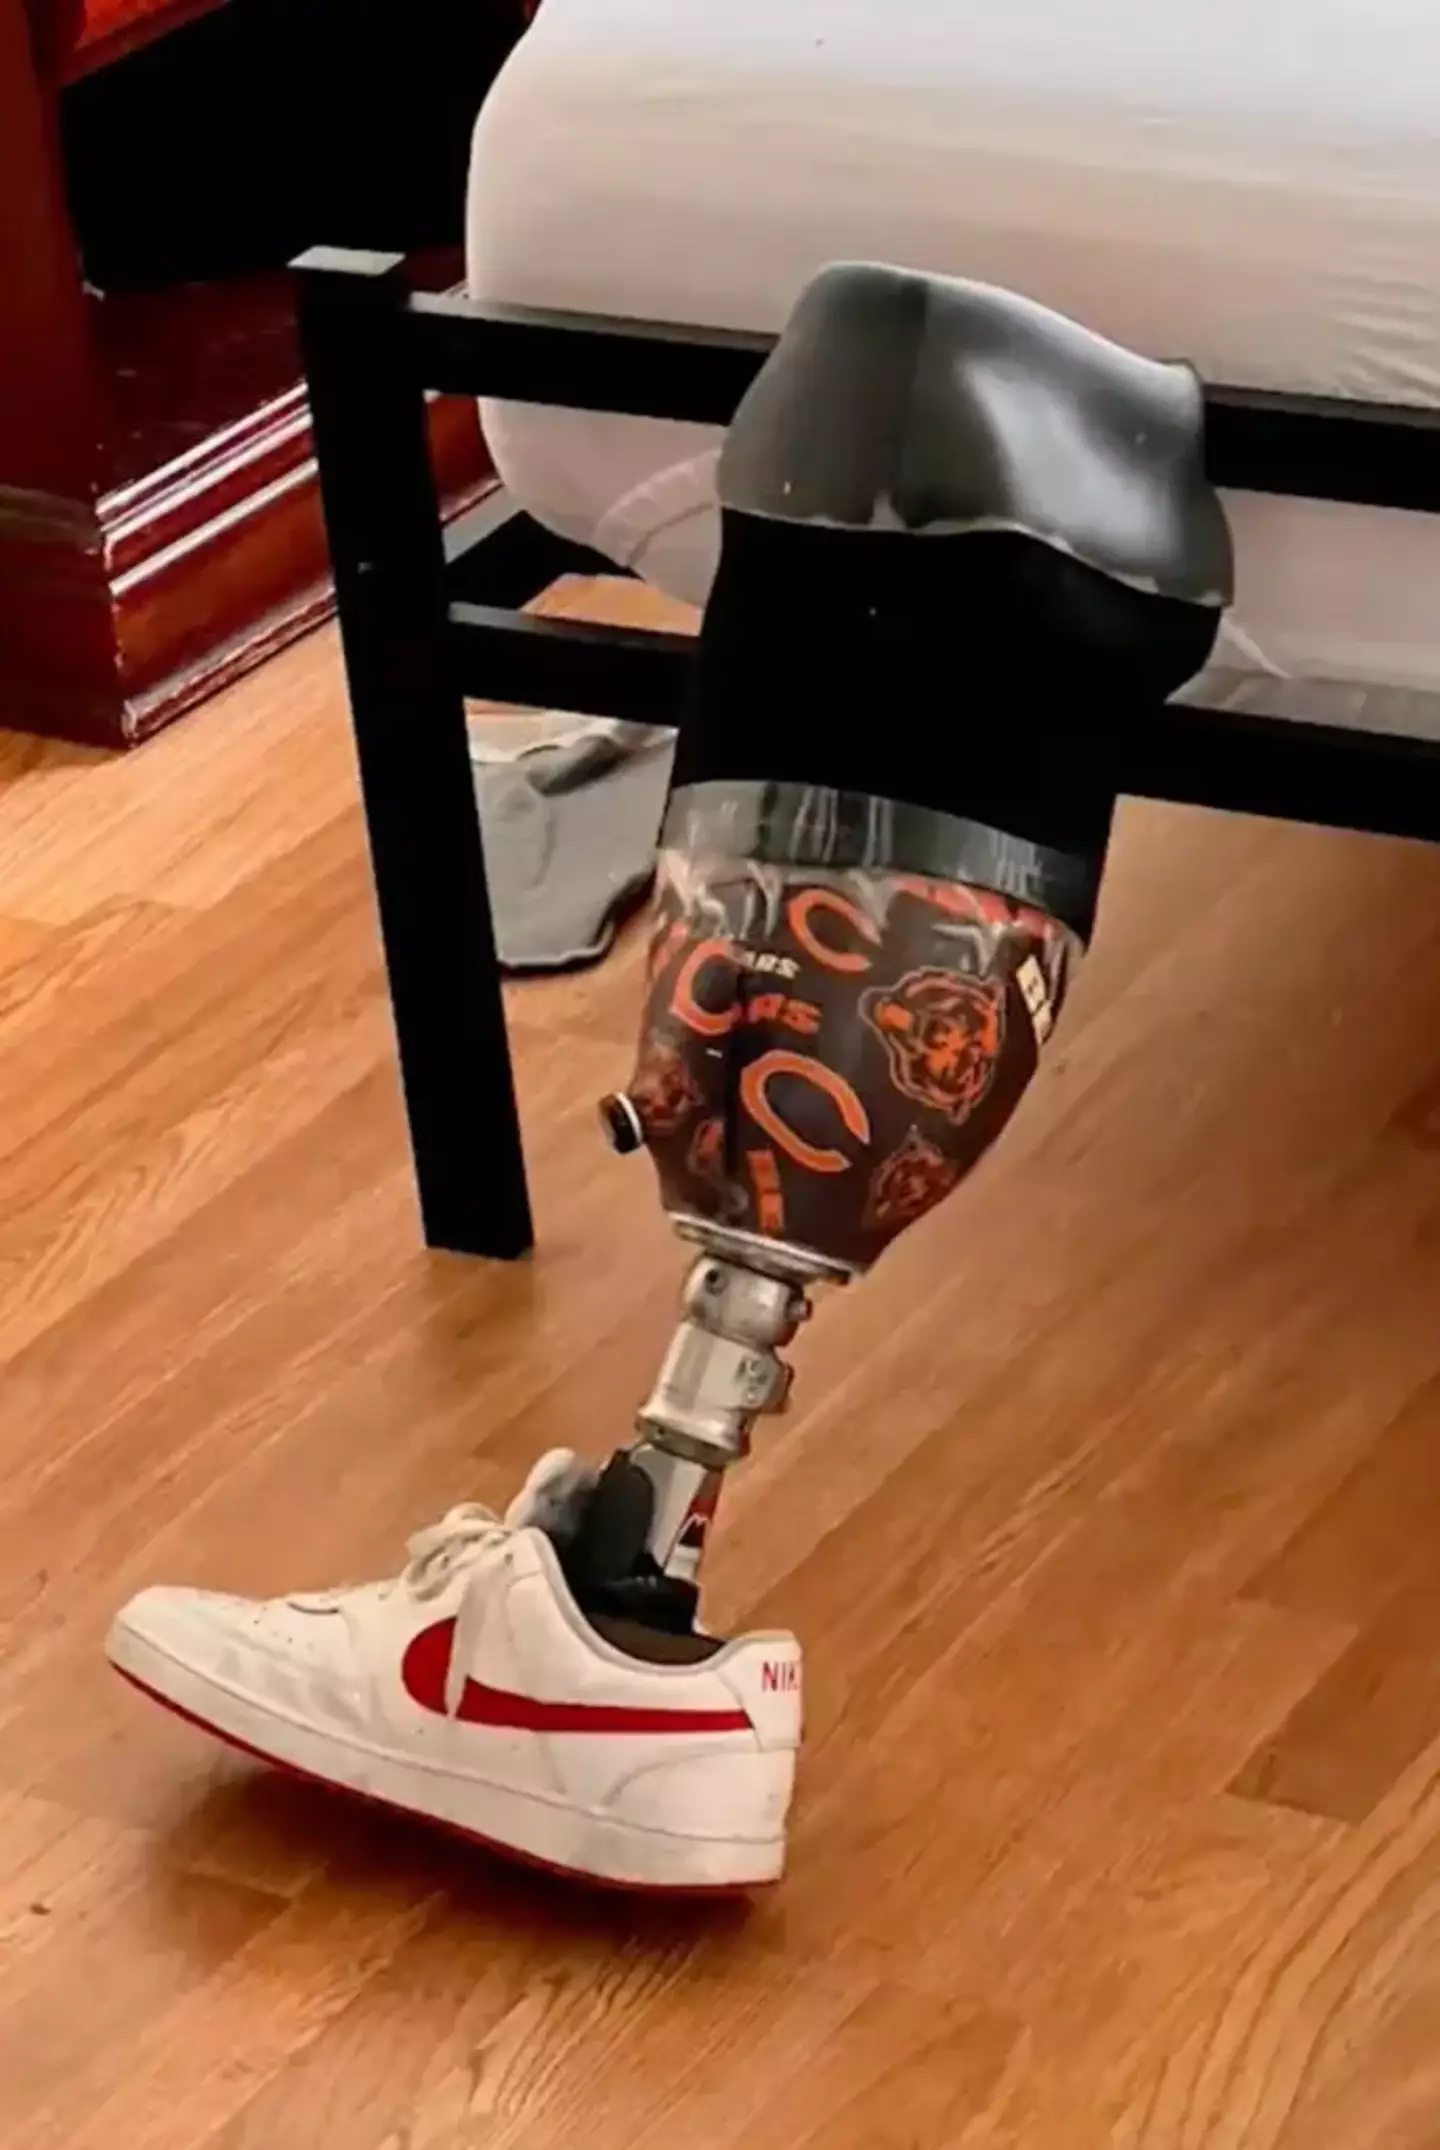 The prosthetic leg is thought to be worth just over $26,000.